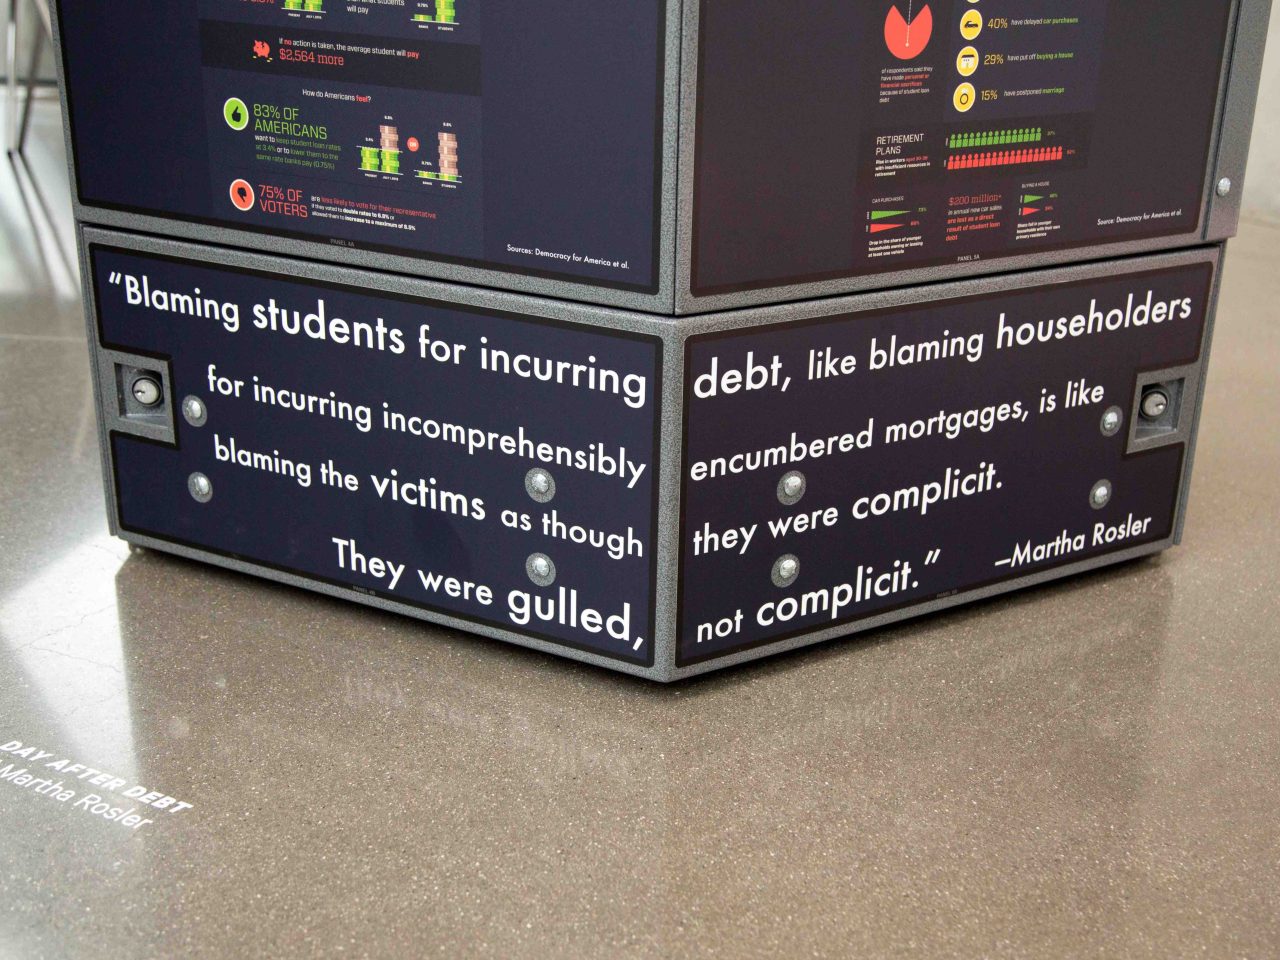 Day After Debt: A Call for Student Loan Relief installation view